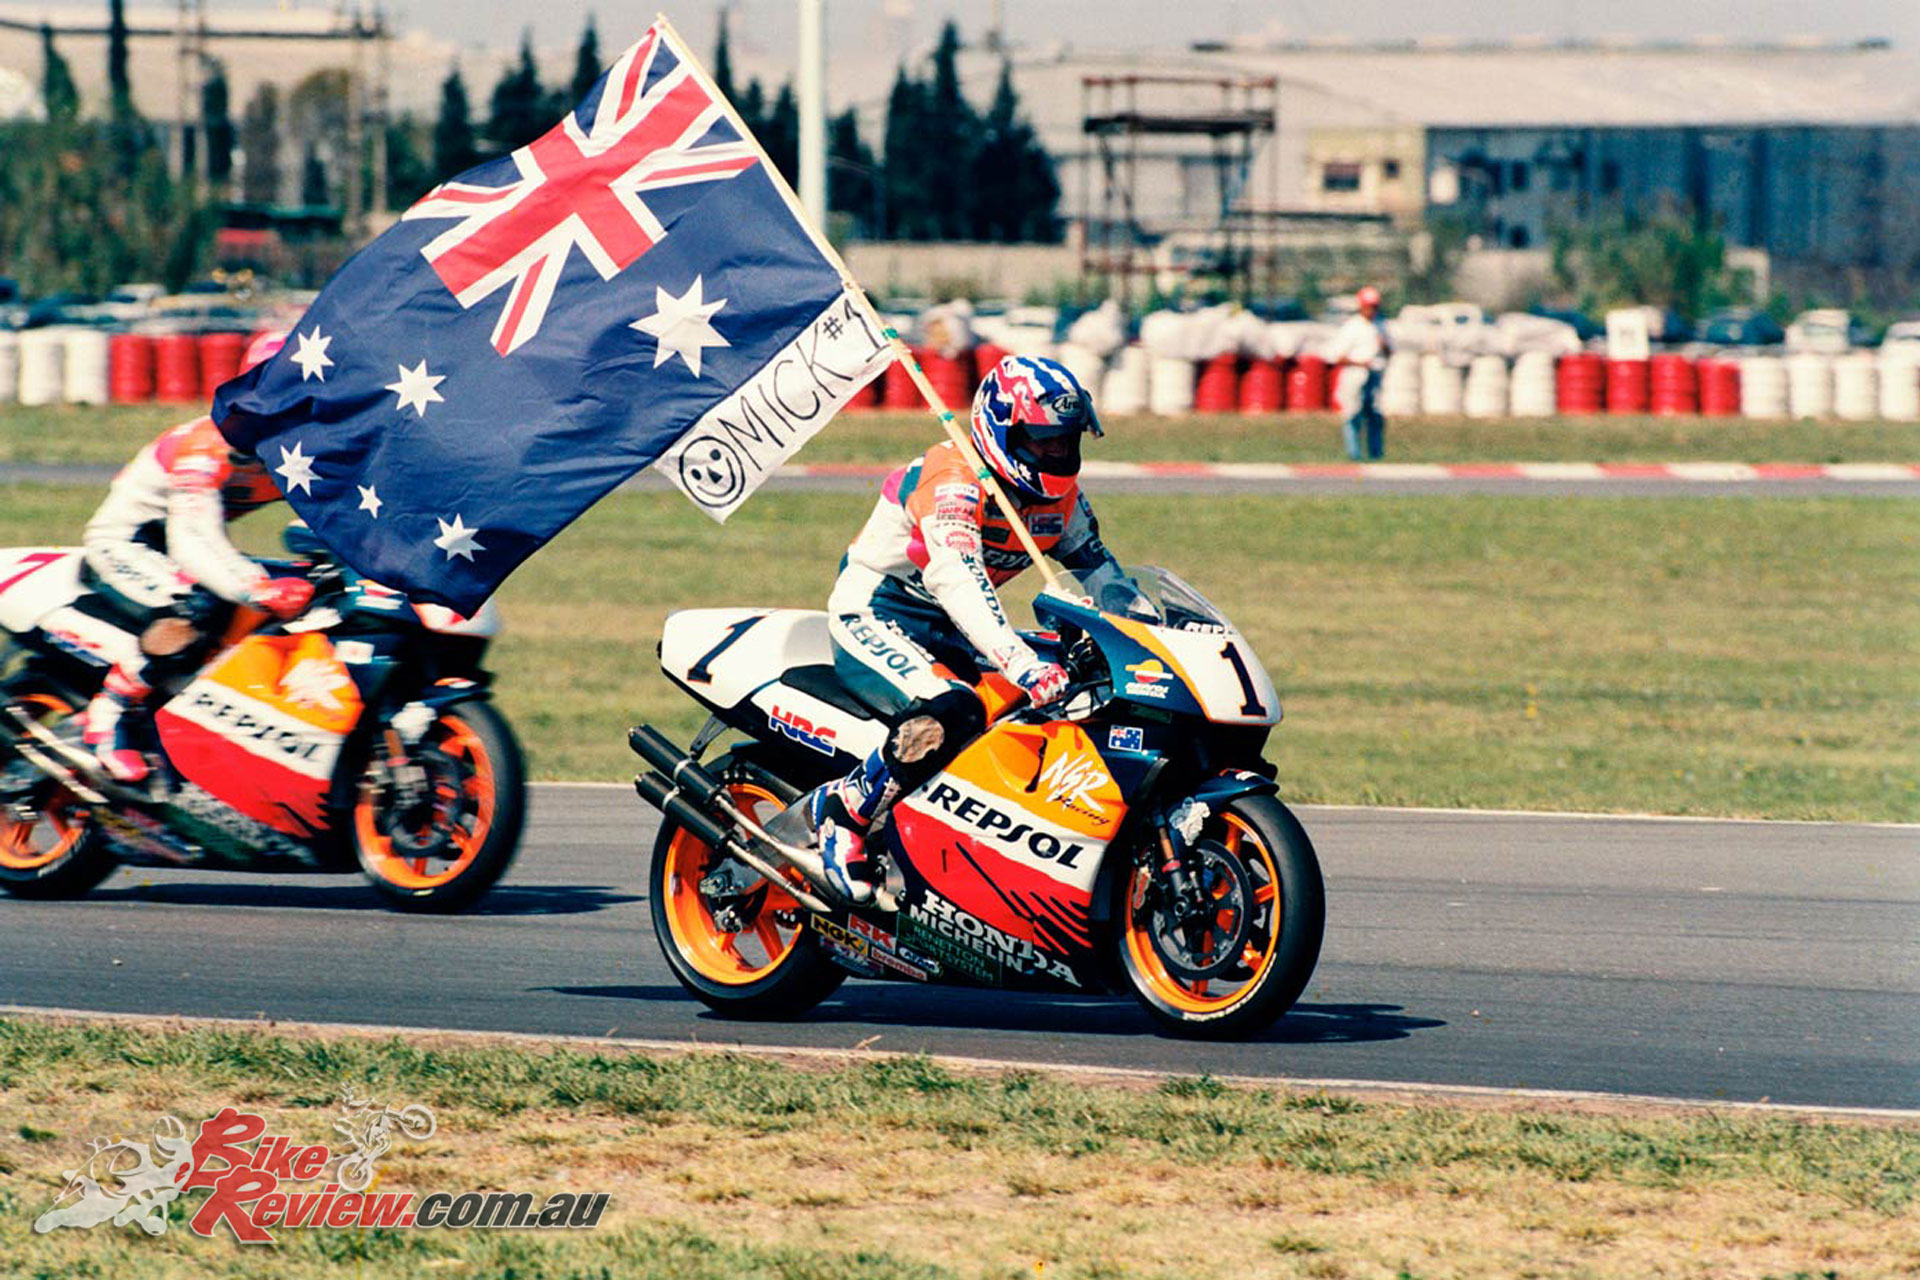 It's almost impossible to believe that the NSR500 had a rocky start, especially since Mick Doohan won five world championships on it! 